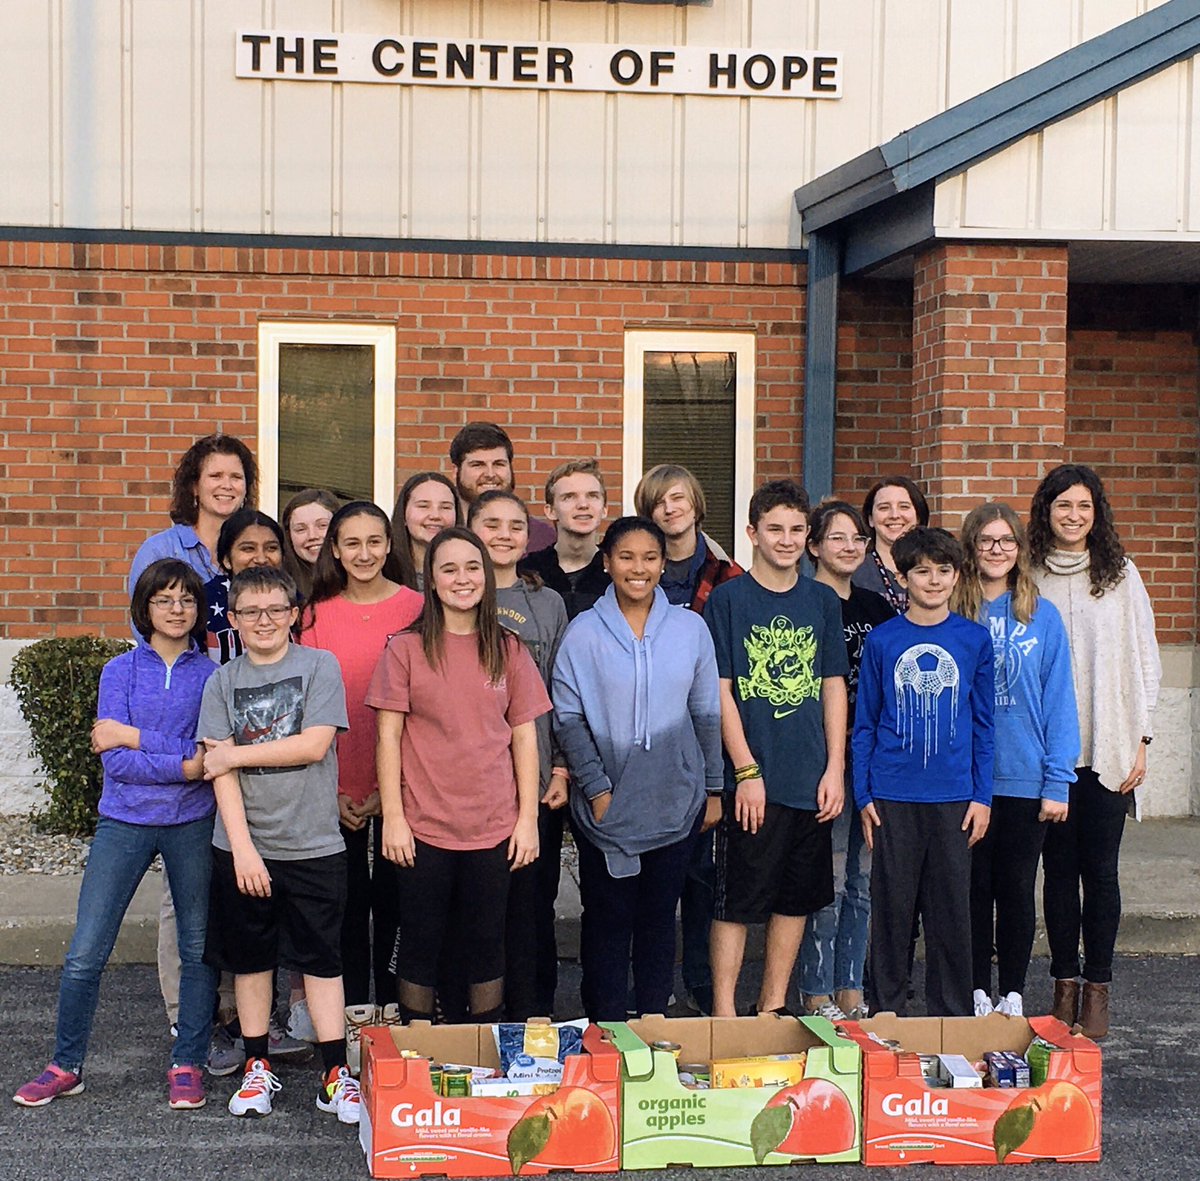 Kindness at the Creek served at the Salvation Army this afternoon. The kids did a great job packing food boxes. @DrakesCreekMS #DoUntoOthers #wcpsleads